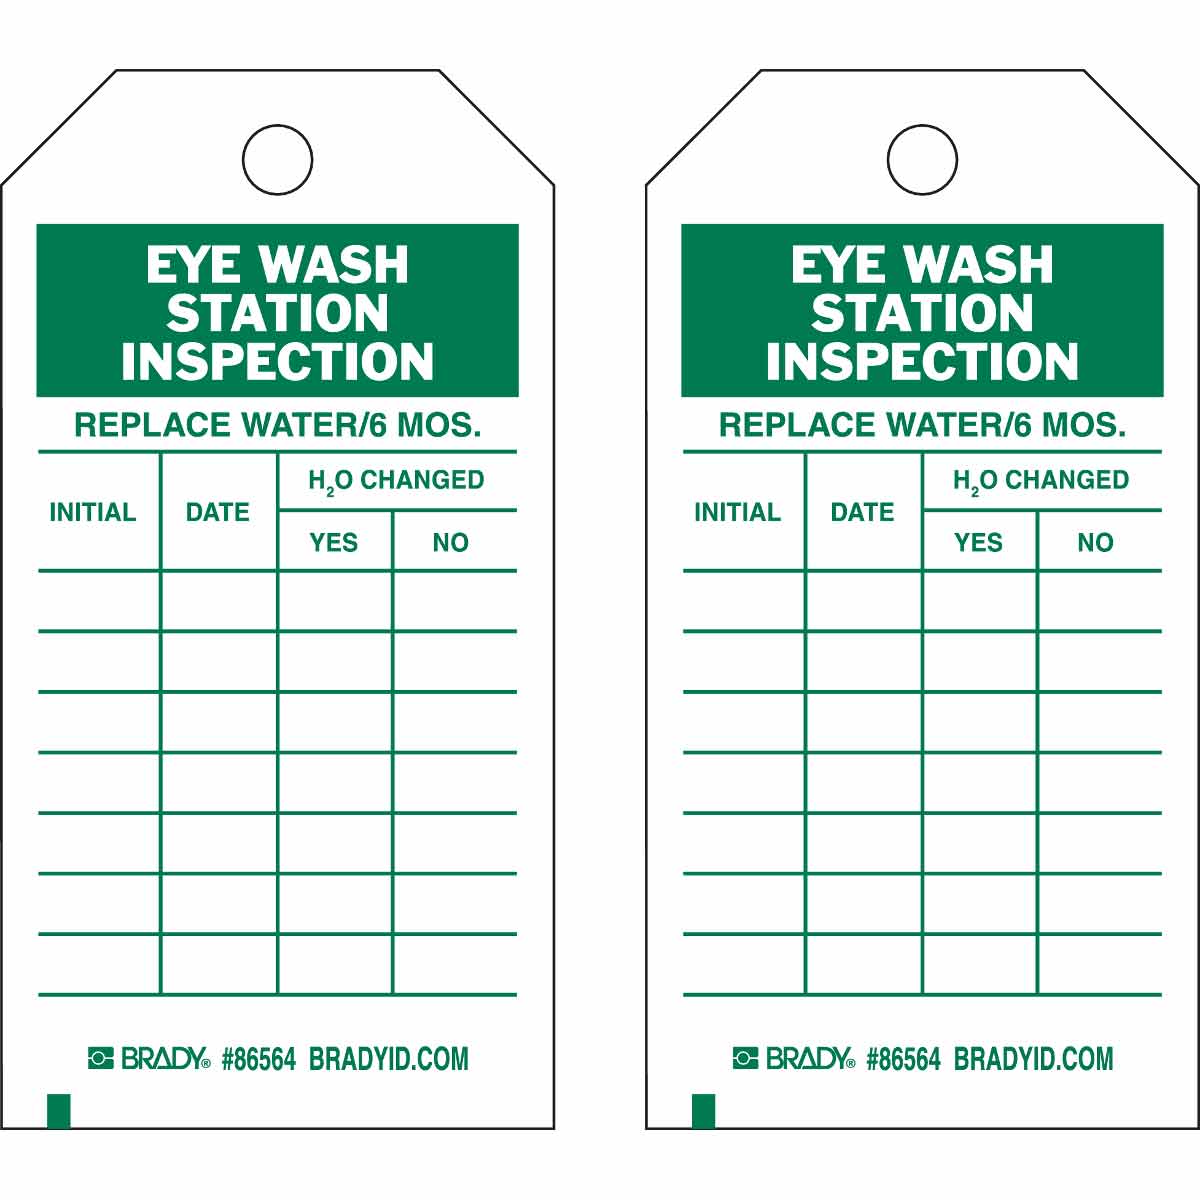 Inspection & Maintenance for Portable Eye Wash Stations